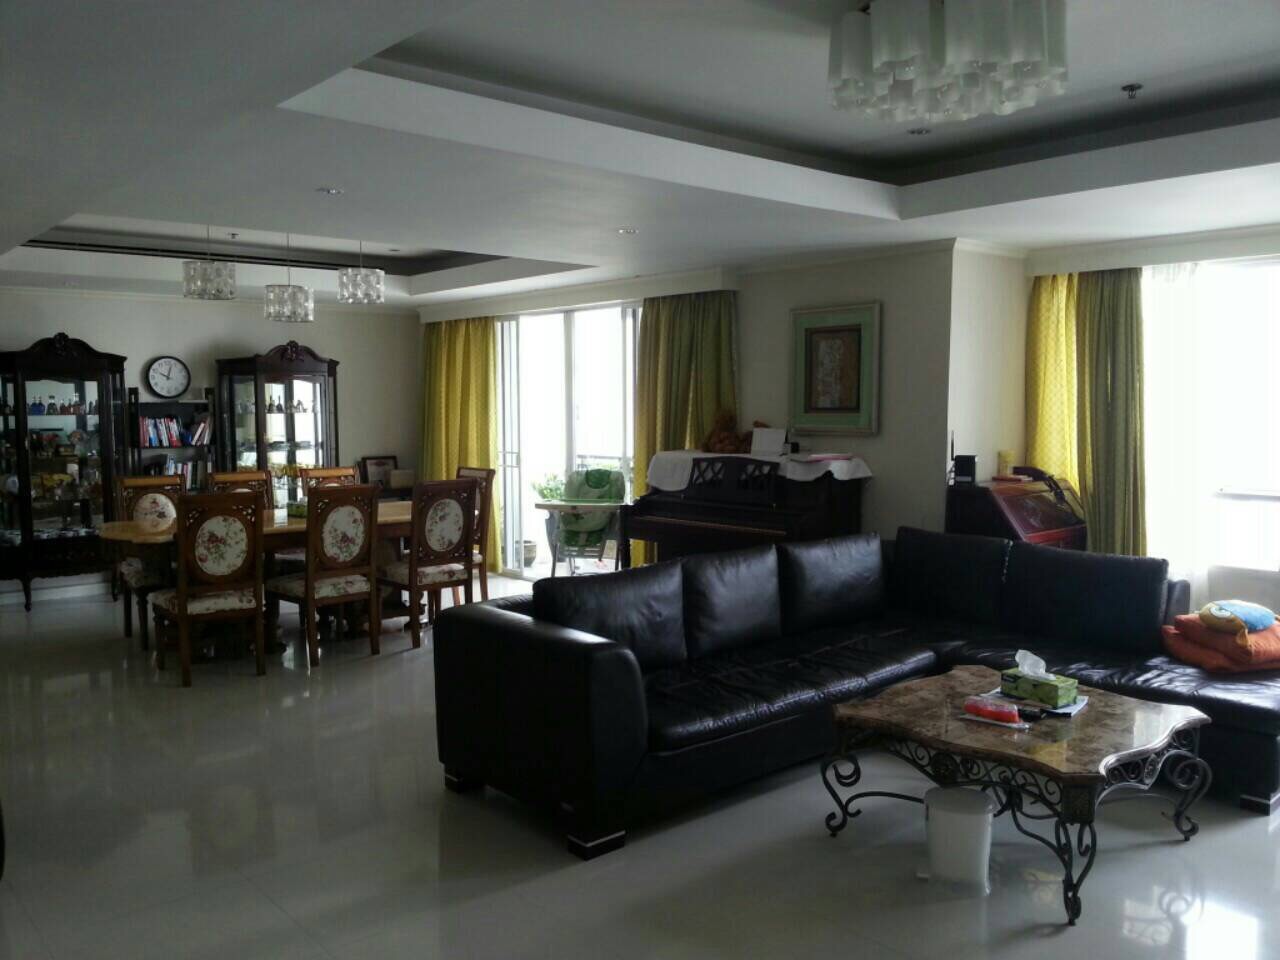 Condo for sell in Sukhumvit 11 3bed 230sqm<br />
fully furnished 1 study 1maid